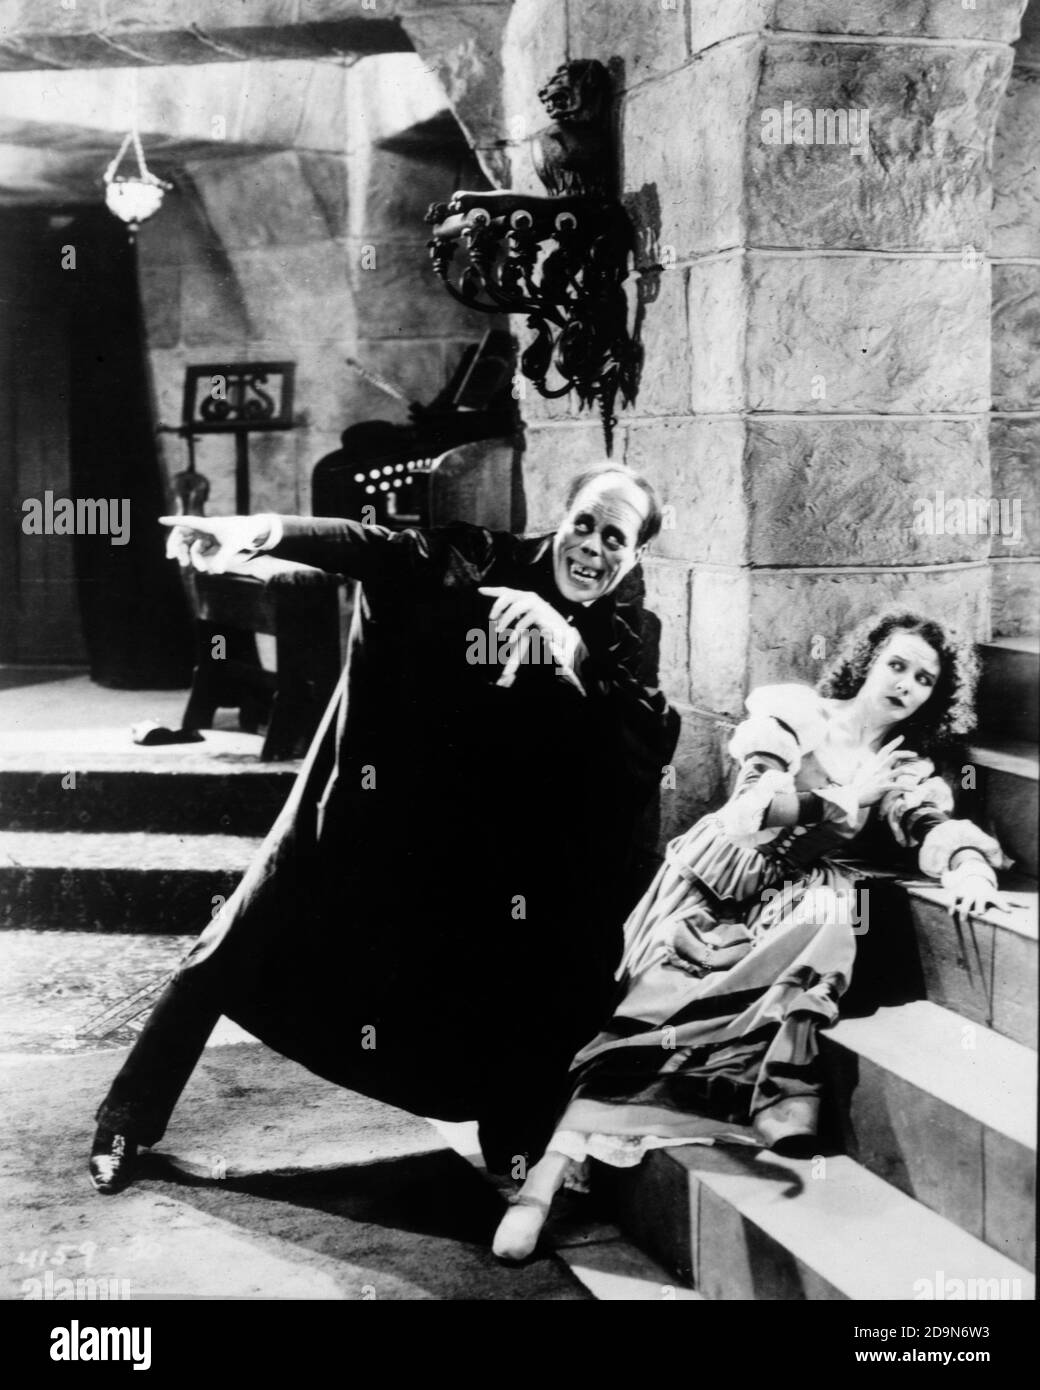 1920s 1925 LON CHANEY AND MARY PHILBIN THE PHANTOM OF THE OPERA HOLLYWOOD SILENT MOVIE PUBLICITY STILL - h9865 NAW001 HARS MARY B&W MOVIES HORROR NORTH AMERICA OPERA NORTH AMERICAN OCCUPATION FILMS ADVENTURE CINEMAS DISCOVERY PERFORMER AND CAREERS ENTERTAINER OCCUPATIONS TERROR CONCEPTUAL PHANTOM ACTORS 1925 SILENT MOVIE MOTION PICTURE MOTION PICTURES PUBLICITY STILL CREATIVITY ENTERTAINERS MOVIE STILL PERFORMERS BLACK AND WHITE CAUCASIAN ETHNICITY OLD FASHIONED Stock Photo